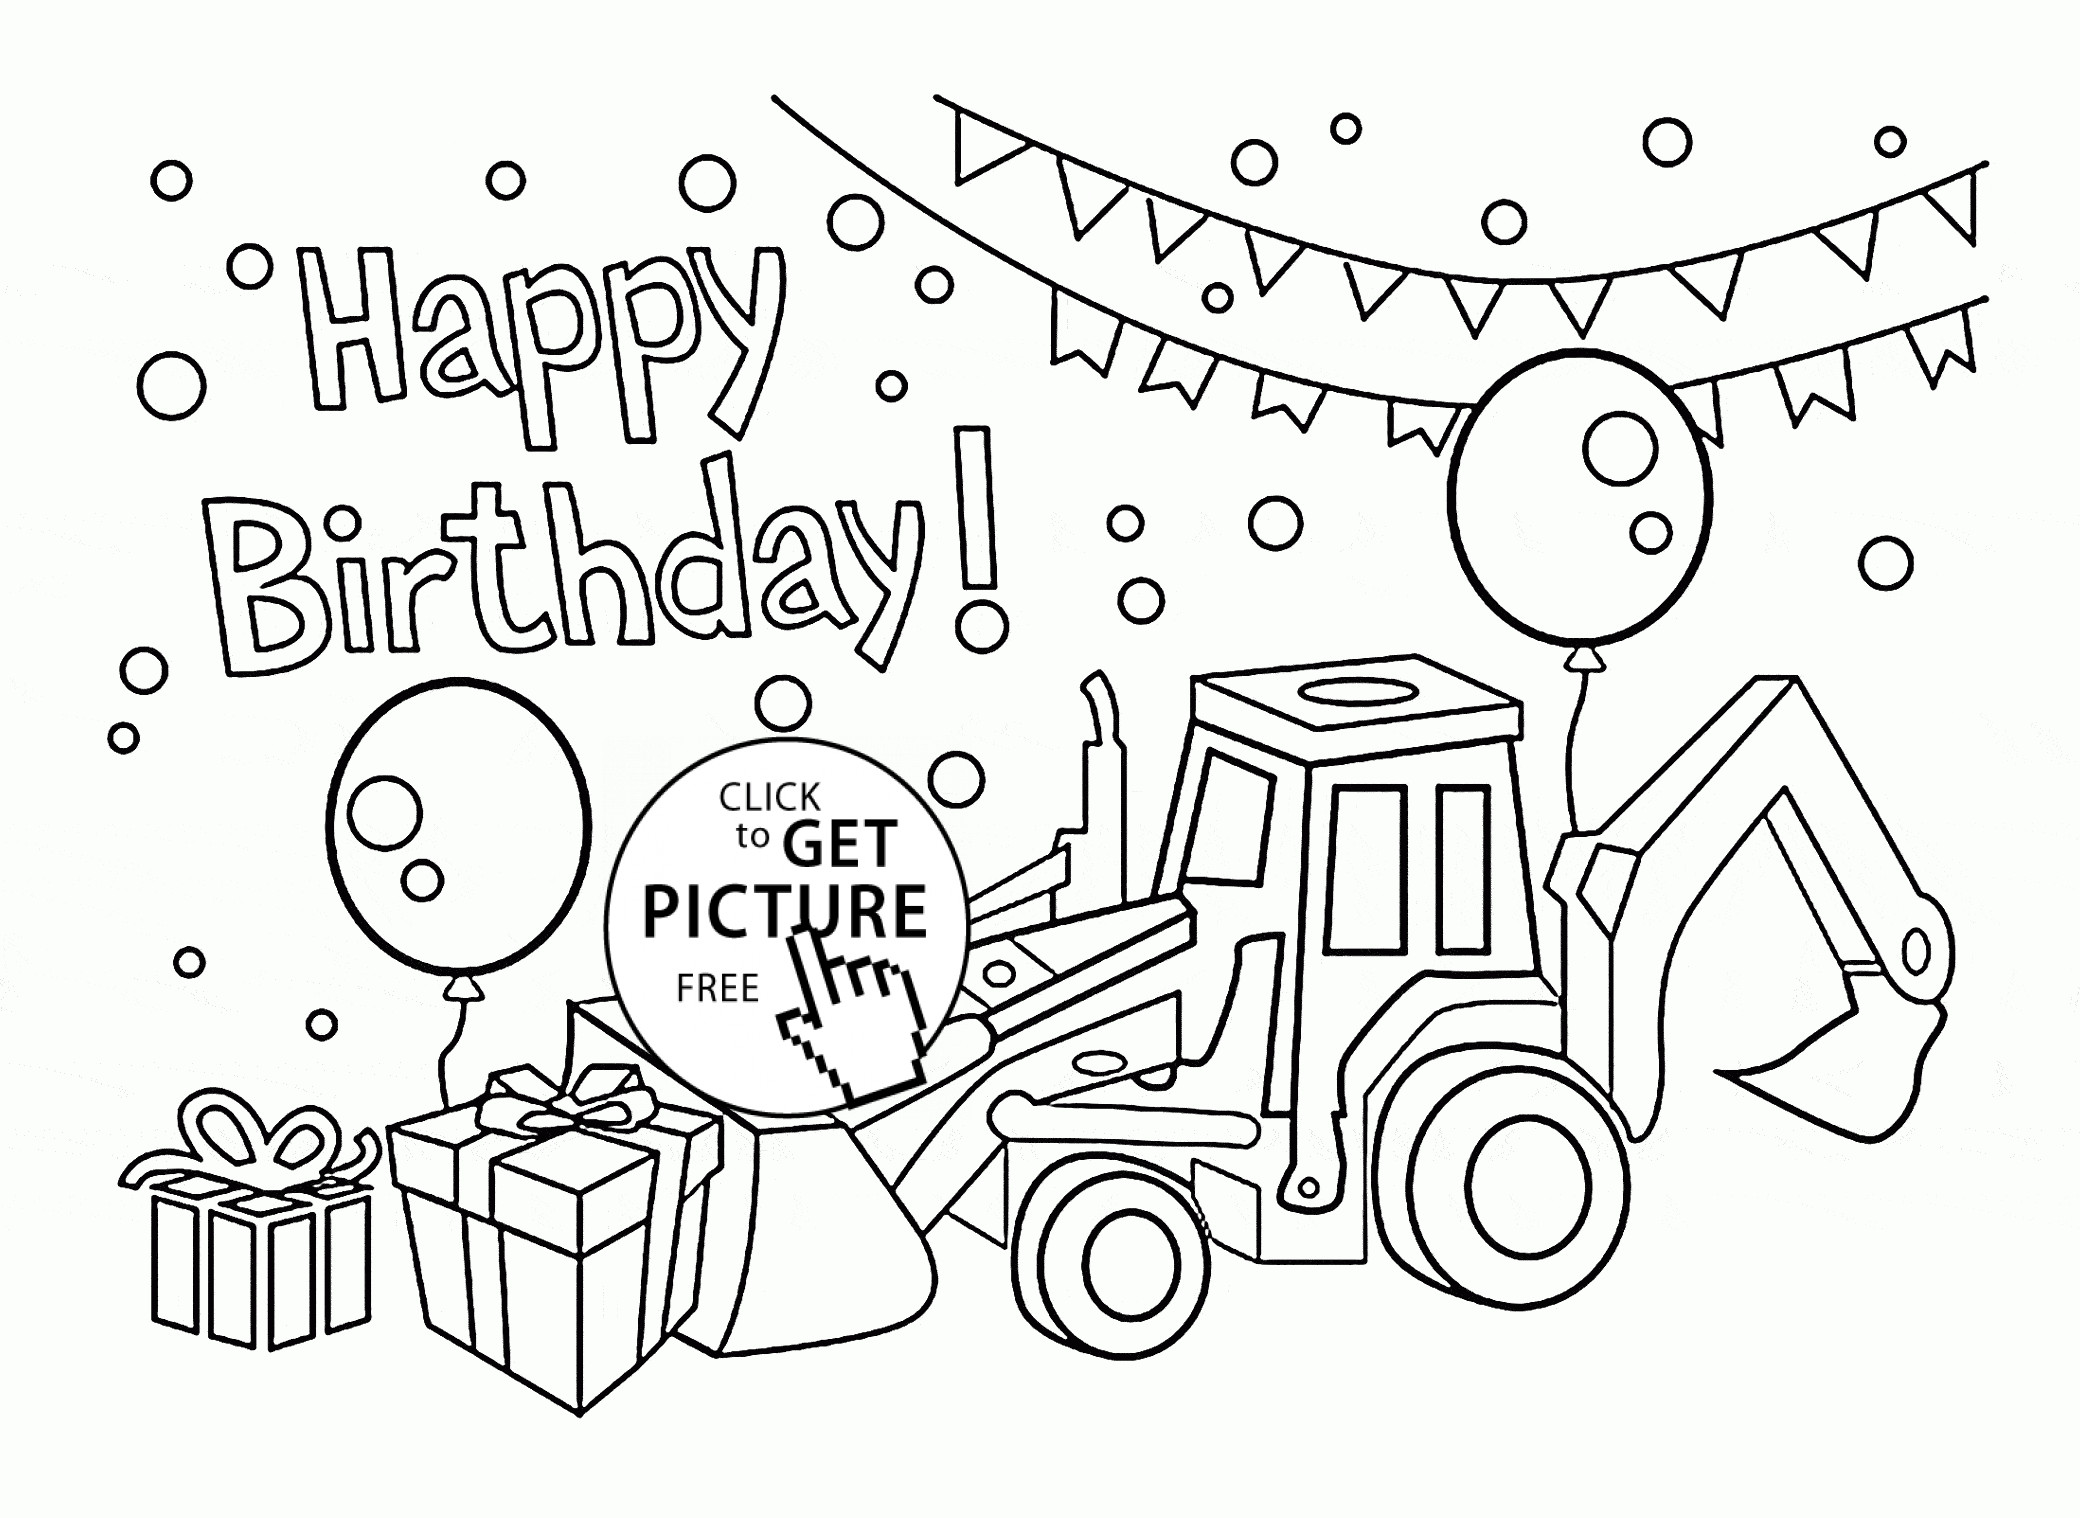 Coloring Birthday Cards
 Happy Birthday Card for Boys coloring page for kids